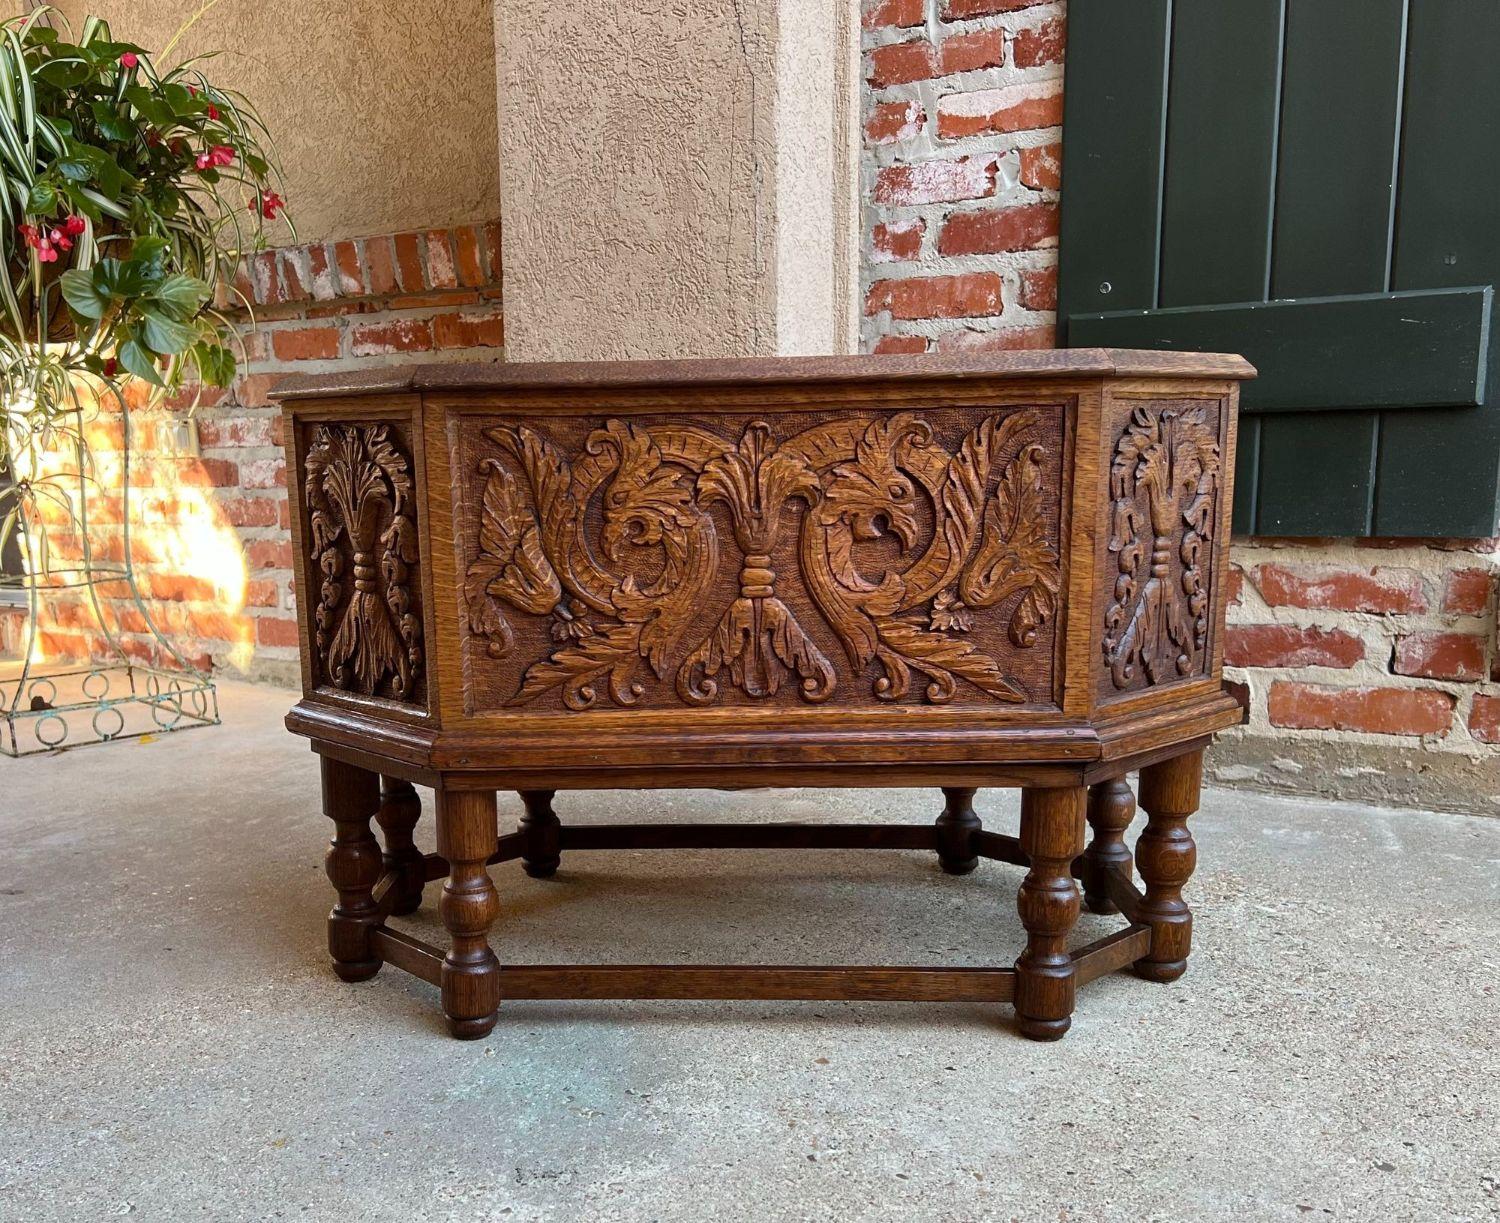 Antique English flower planter drink wine server Carved Oak w Liner.

Direct from England, a wonderfully hand carved planter or wine cellarette! This would also be fabulous sitting by the fireplace to hold logs and kindling! The design lends